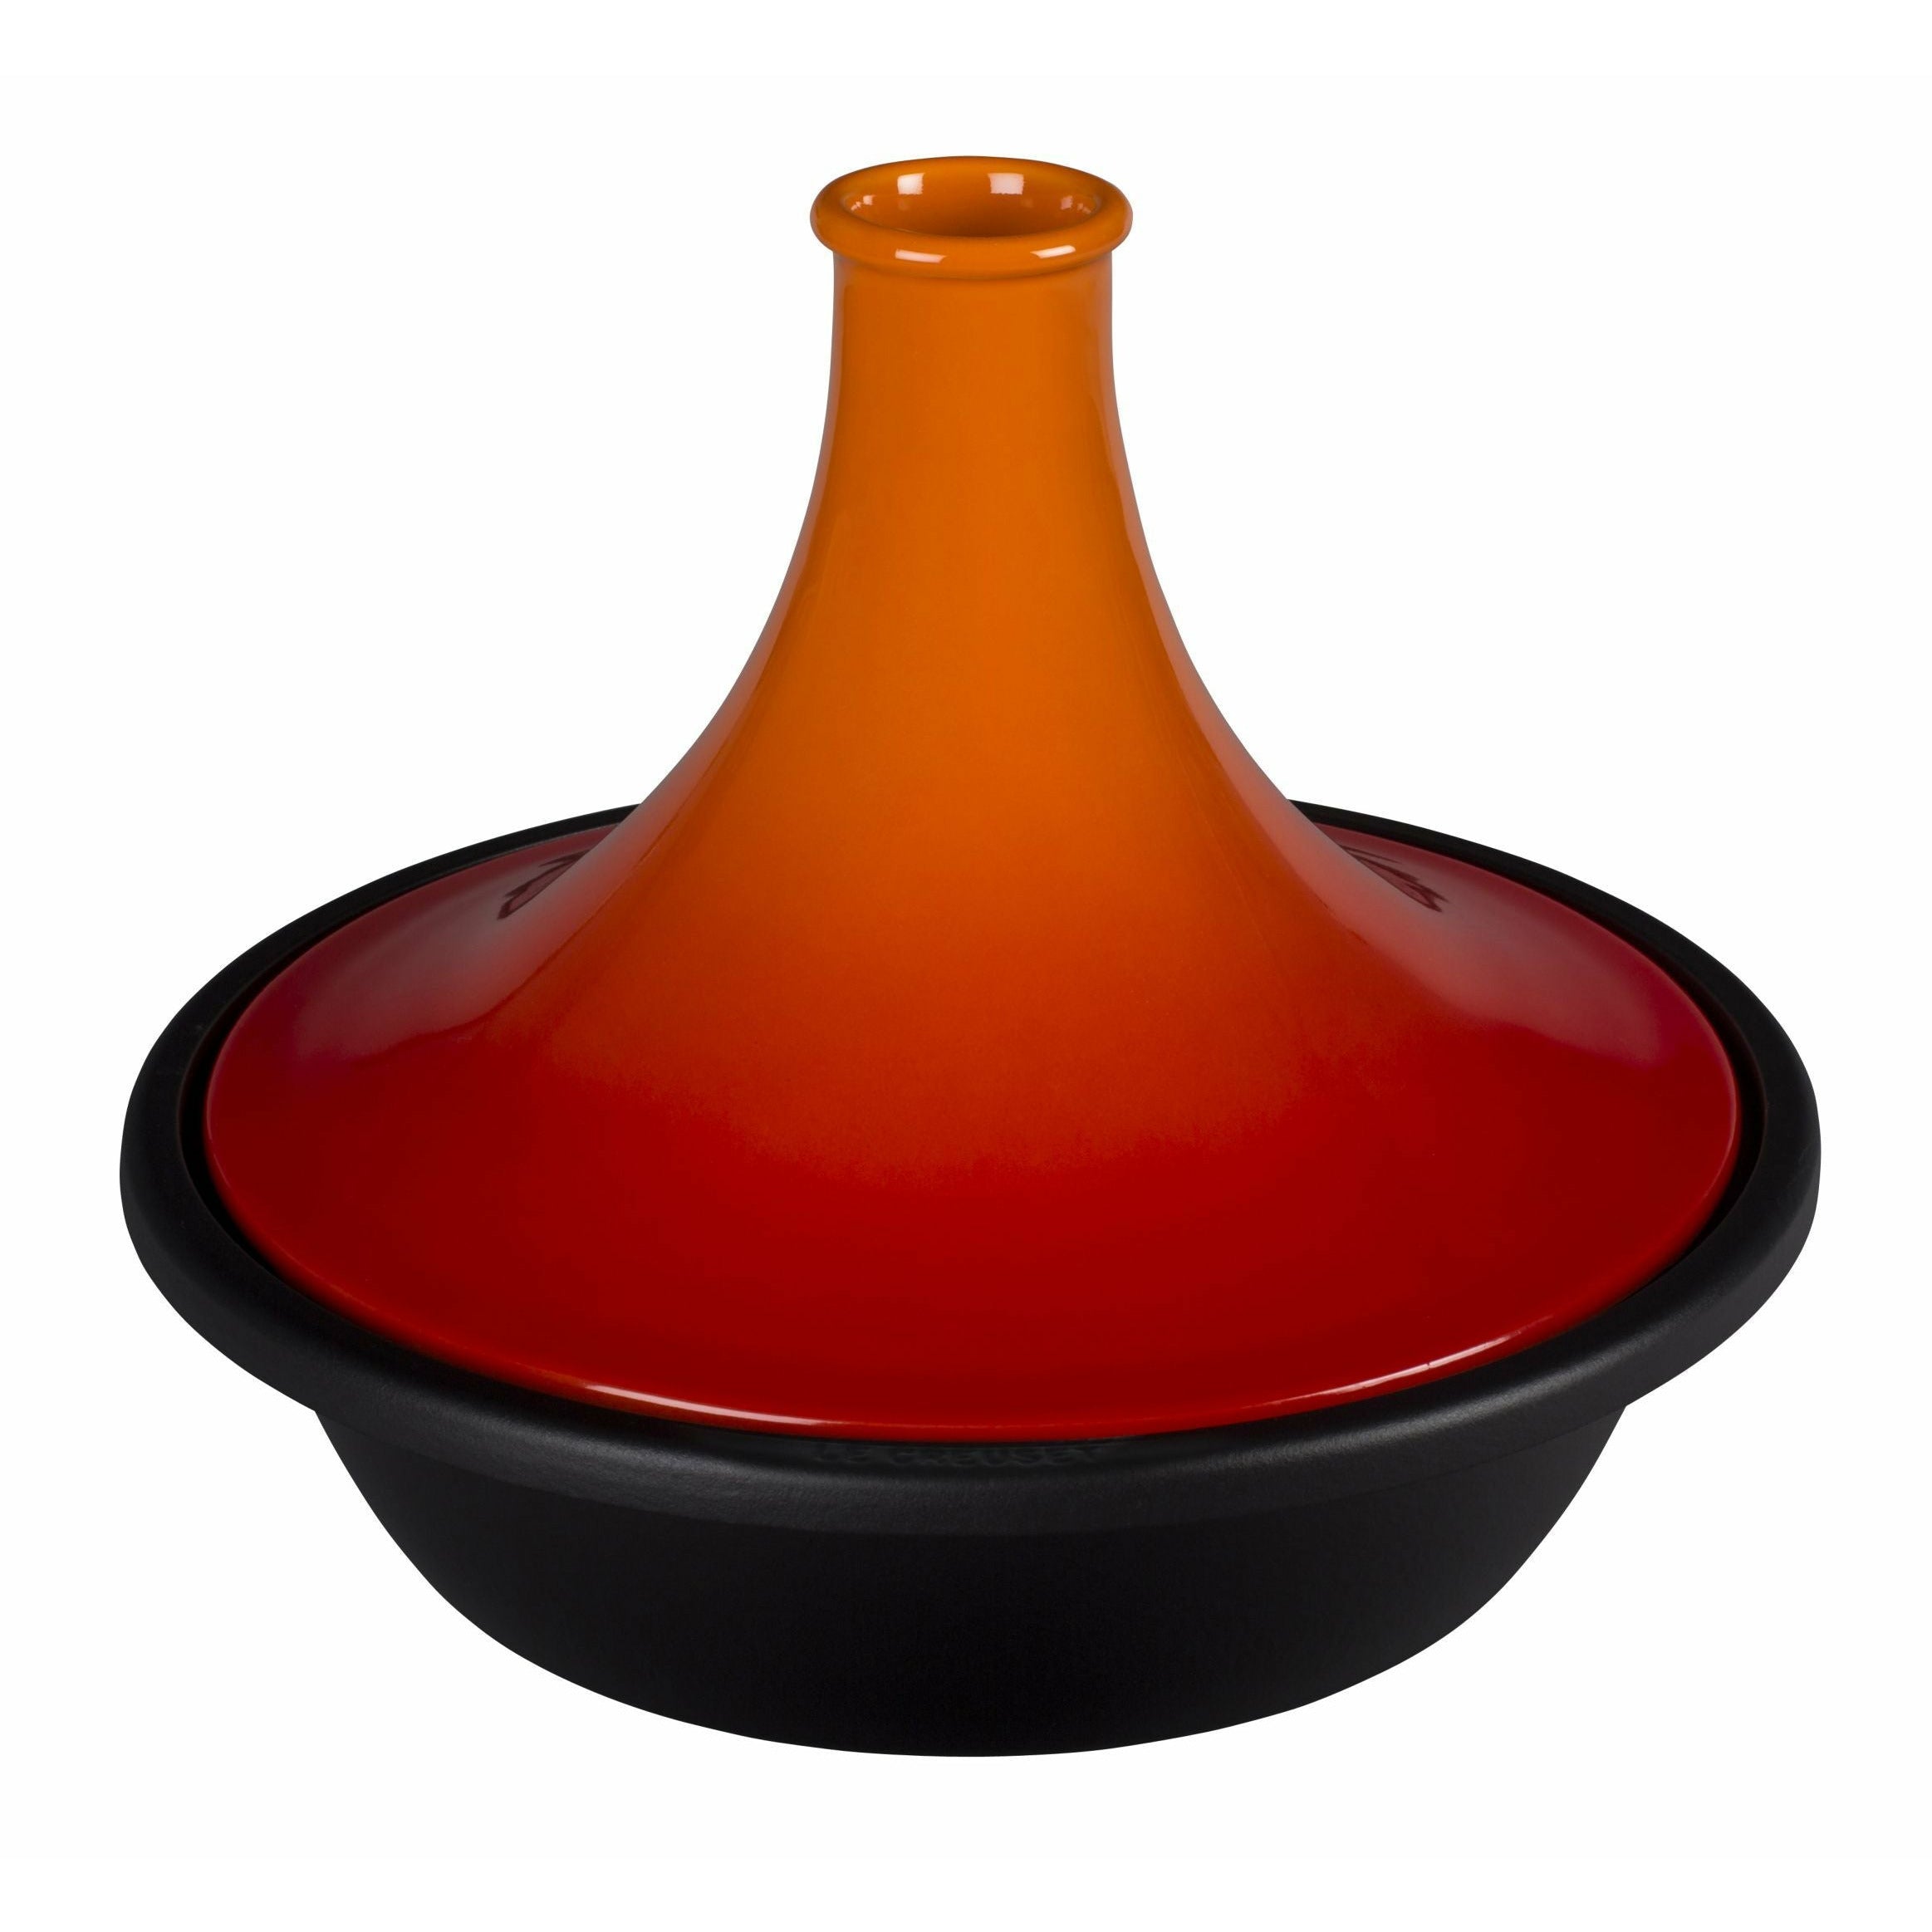 Le Creuset Tagine 31 Cm, Oven Red